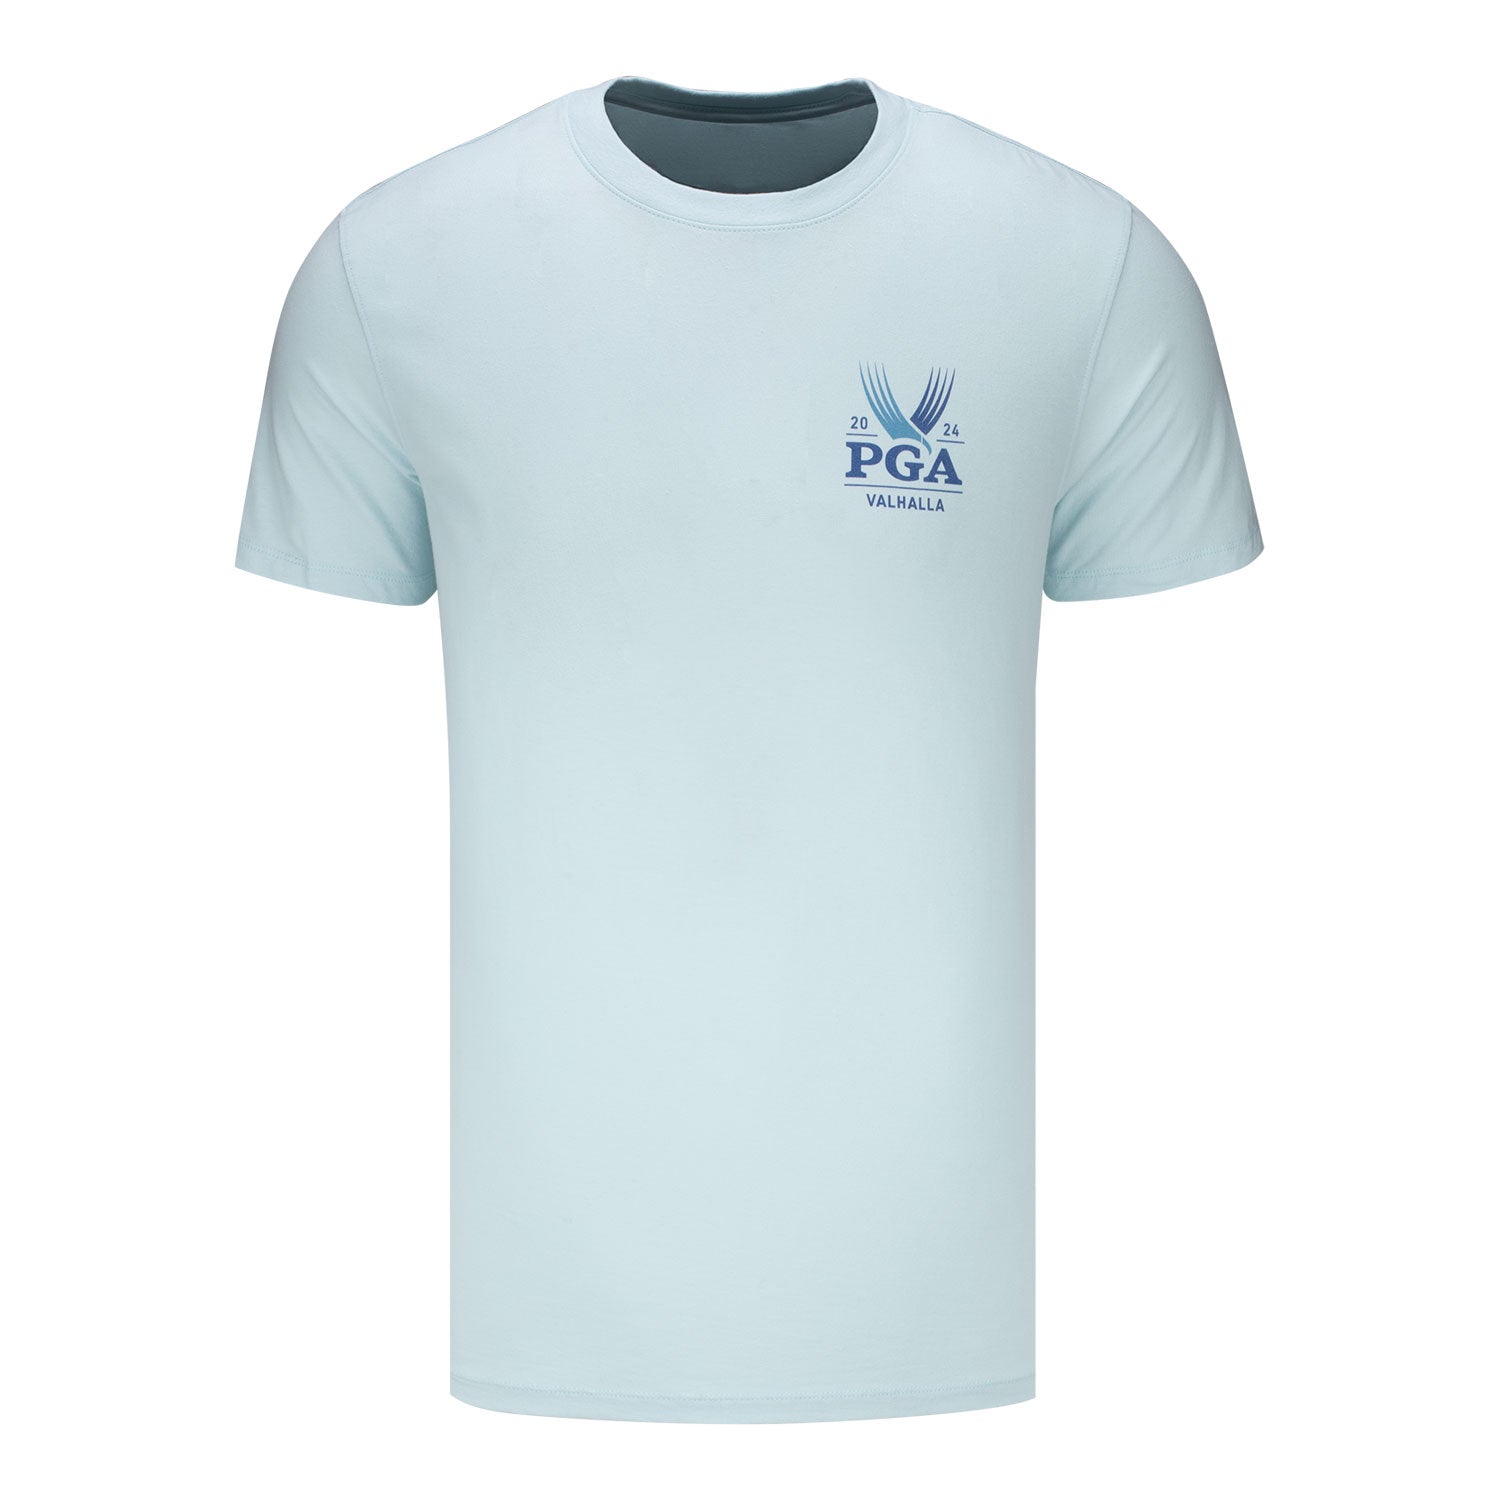 Imperial 2024 PGA Championship Placard T-Shirt in Cool Blue - Back View